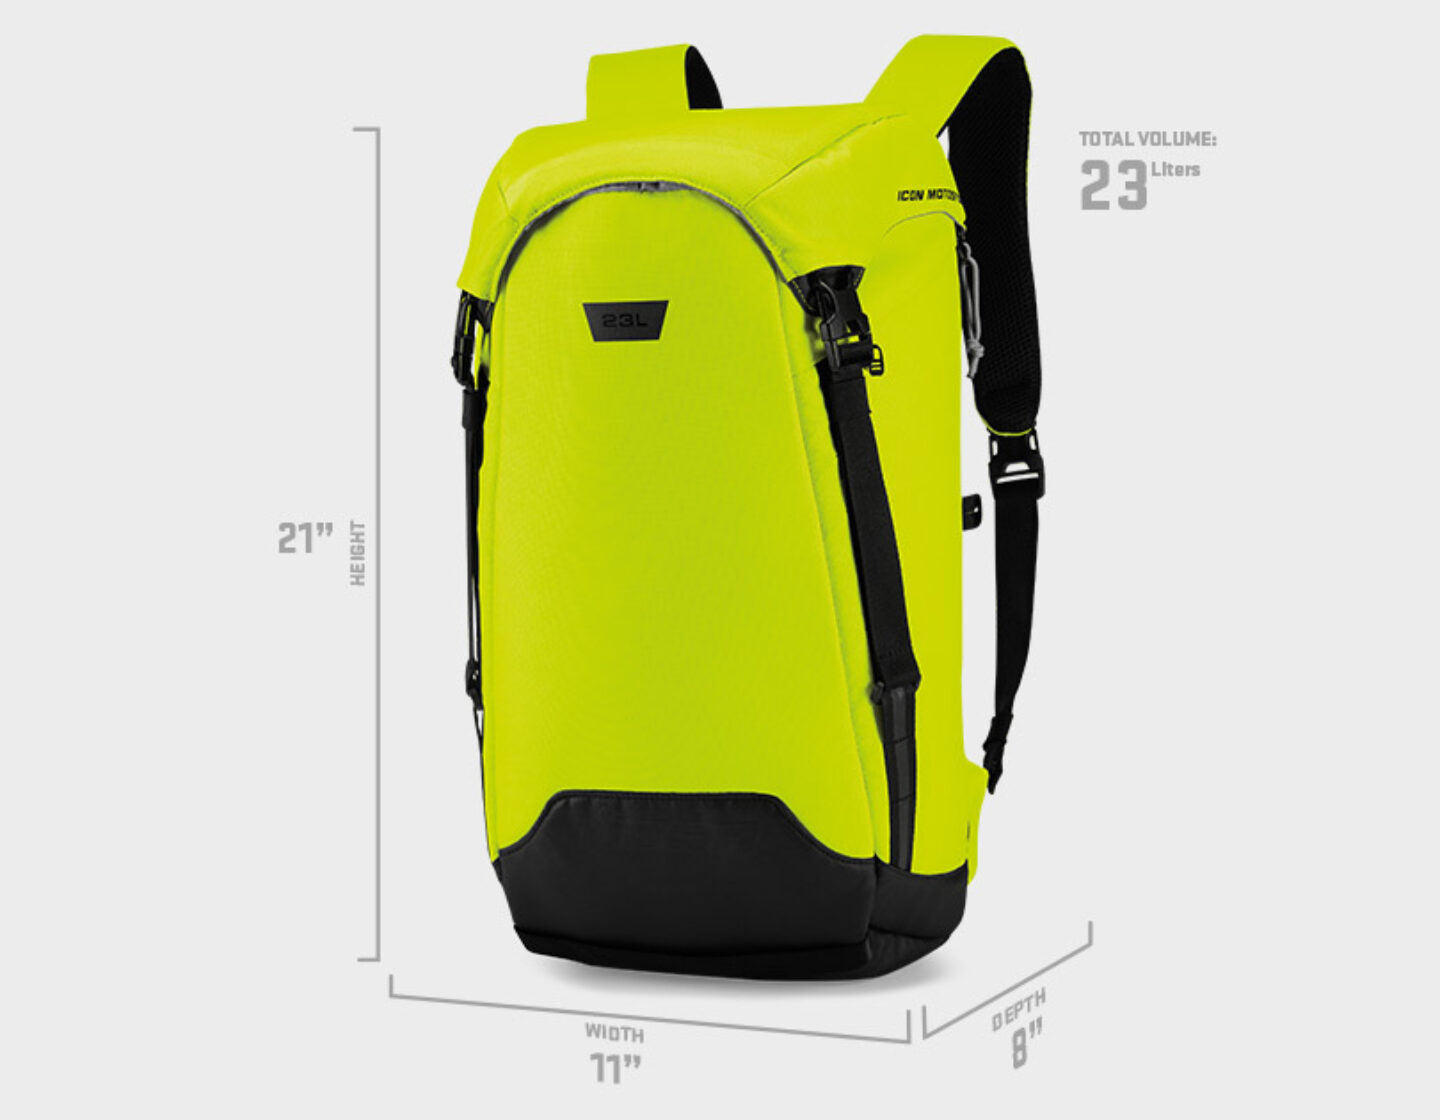 Icon Squad 4 Backpack